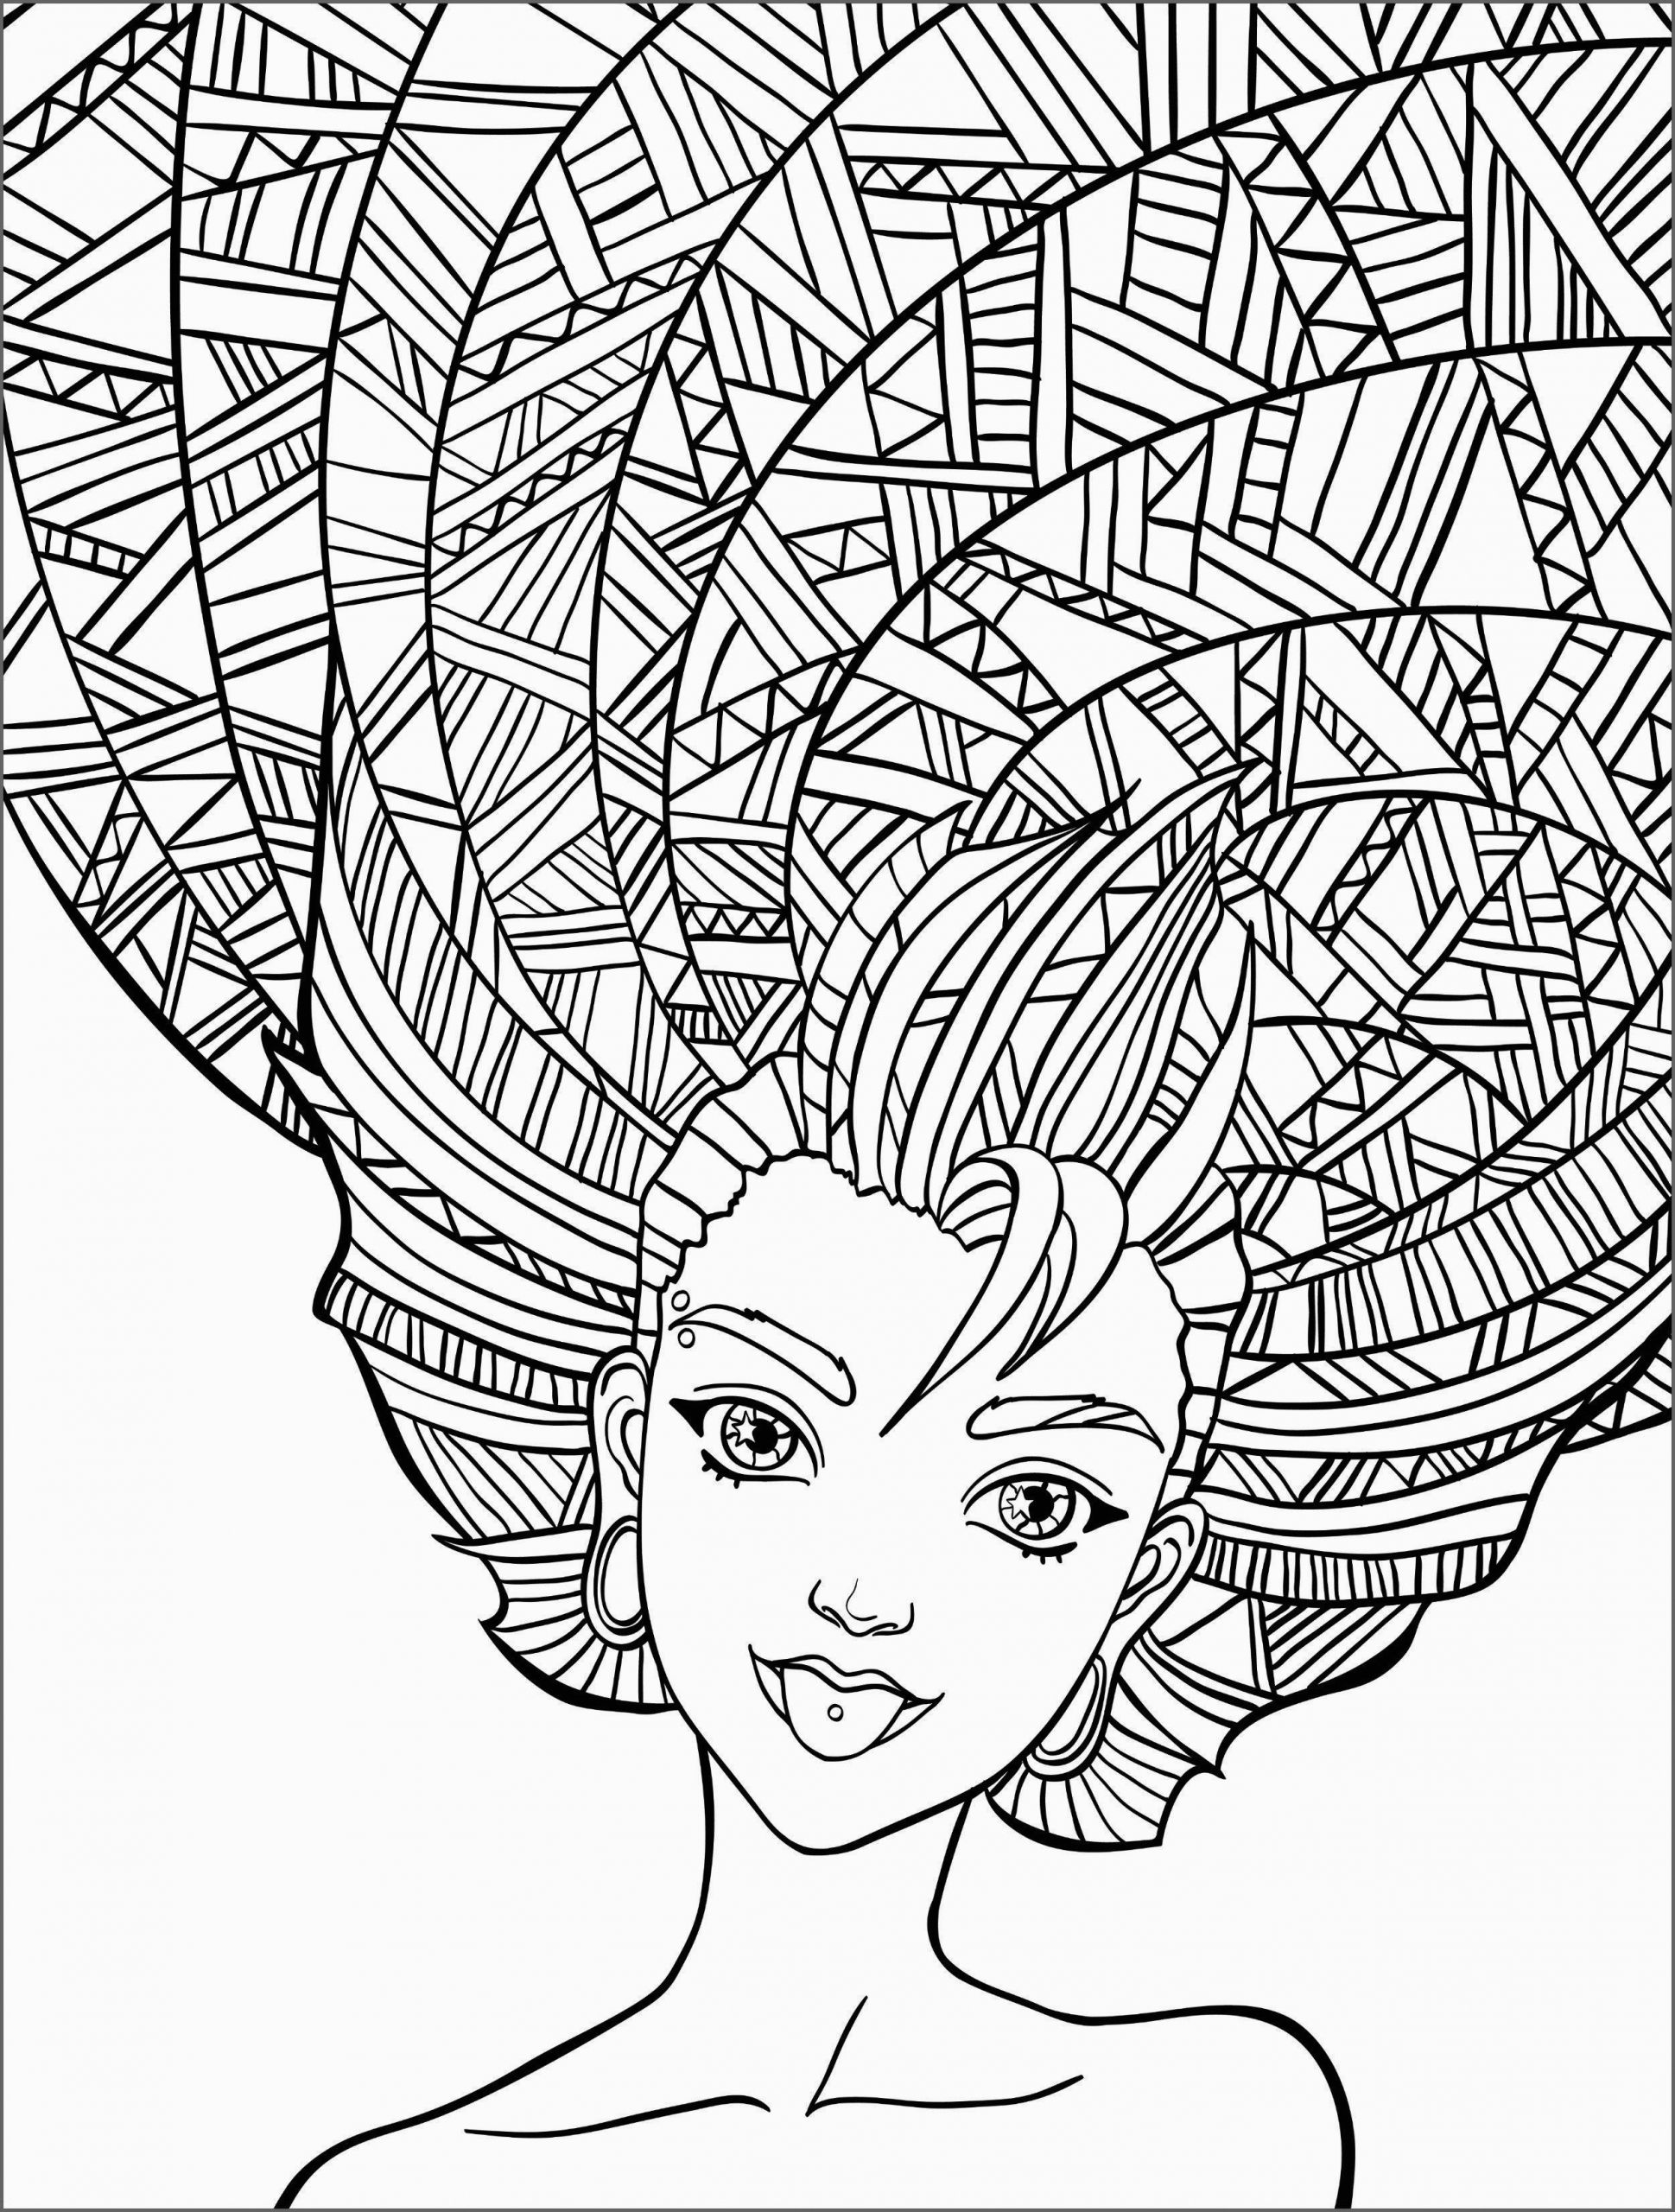 Free Coloring Pages Adult
 Coloring Pages for Adults Best Coloring Pages For Kids